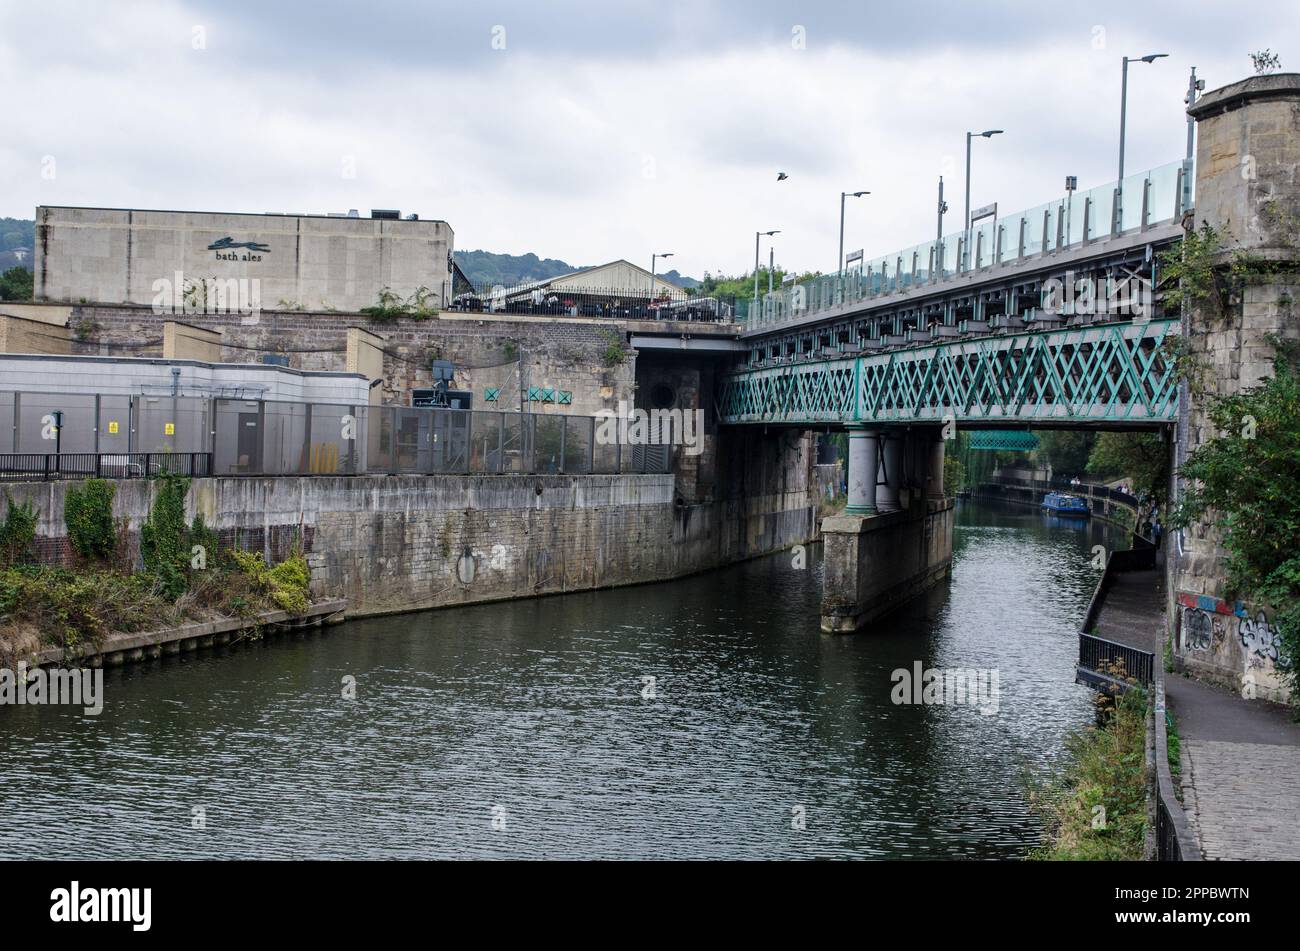 Bath, UK - September 3, 2022: View across the River Avon towards Bath Spa Railway Station on a cloudy afternoon in the autumn. Stock Photo